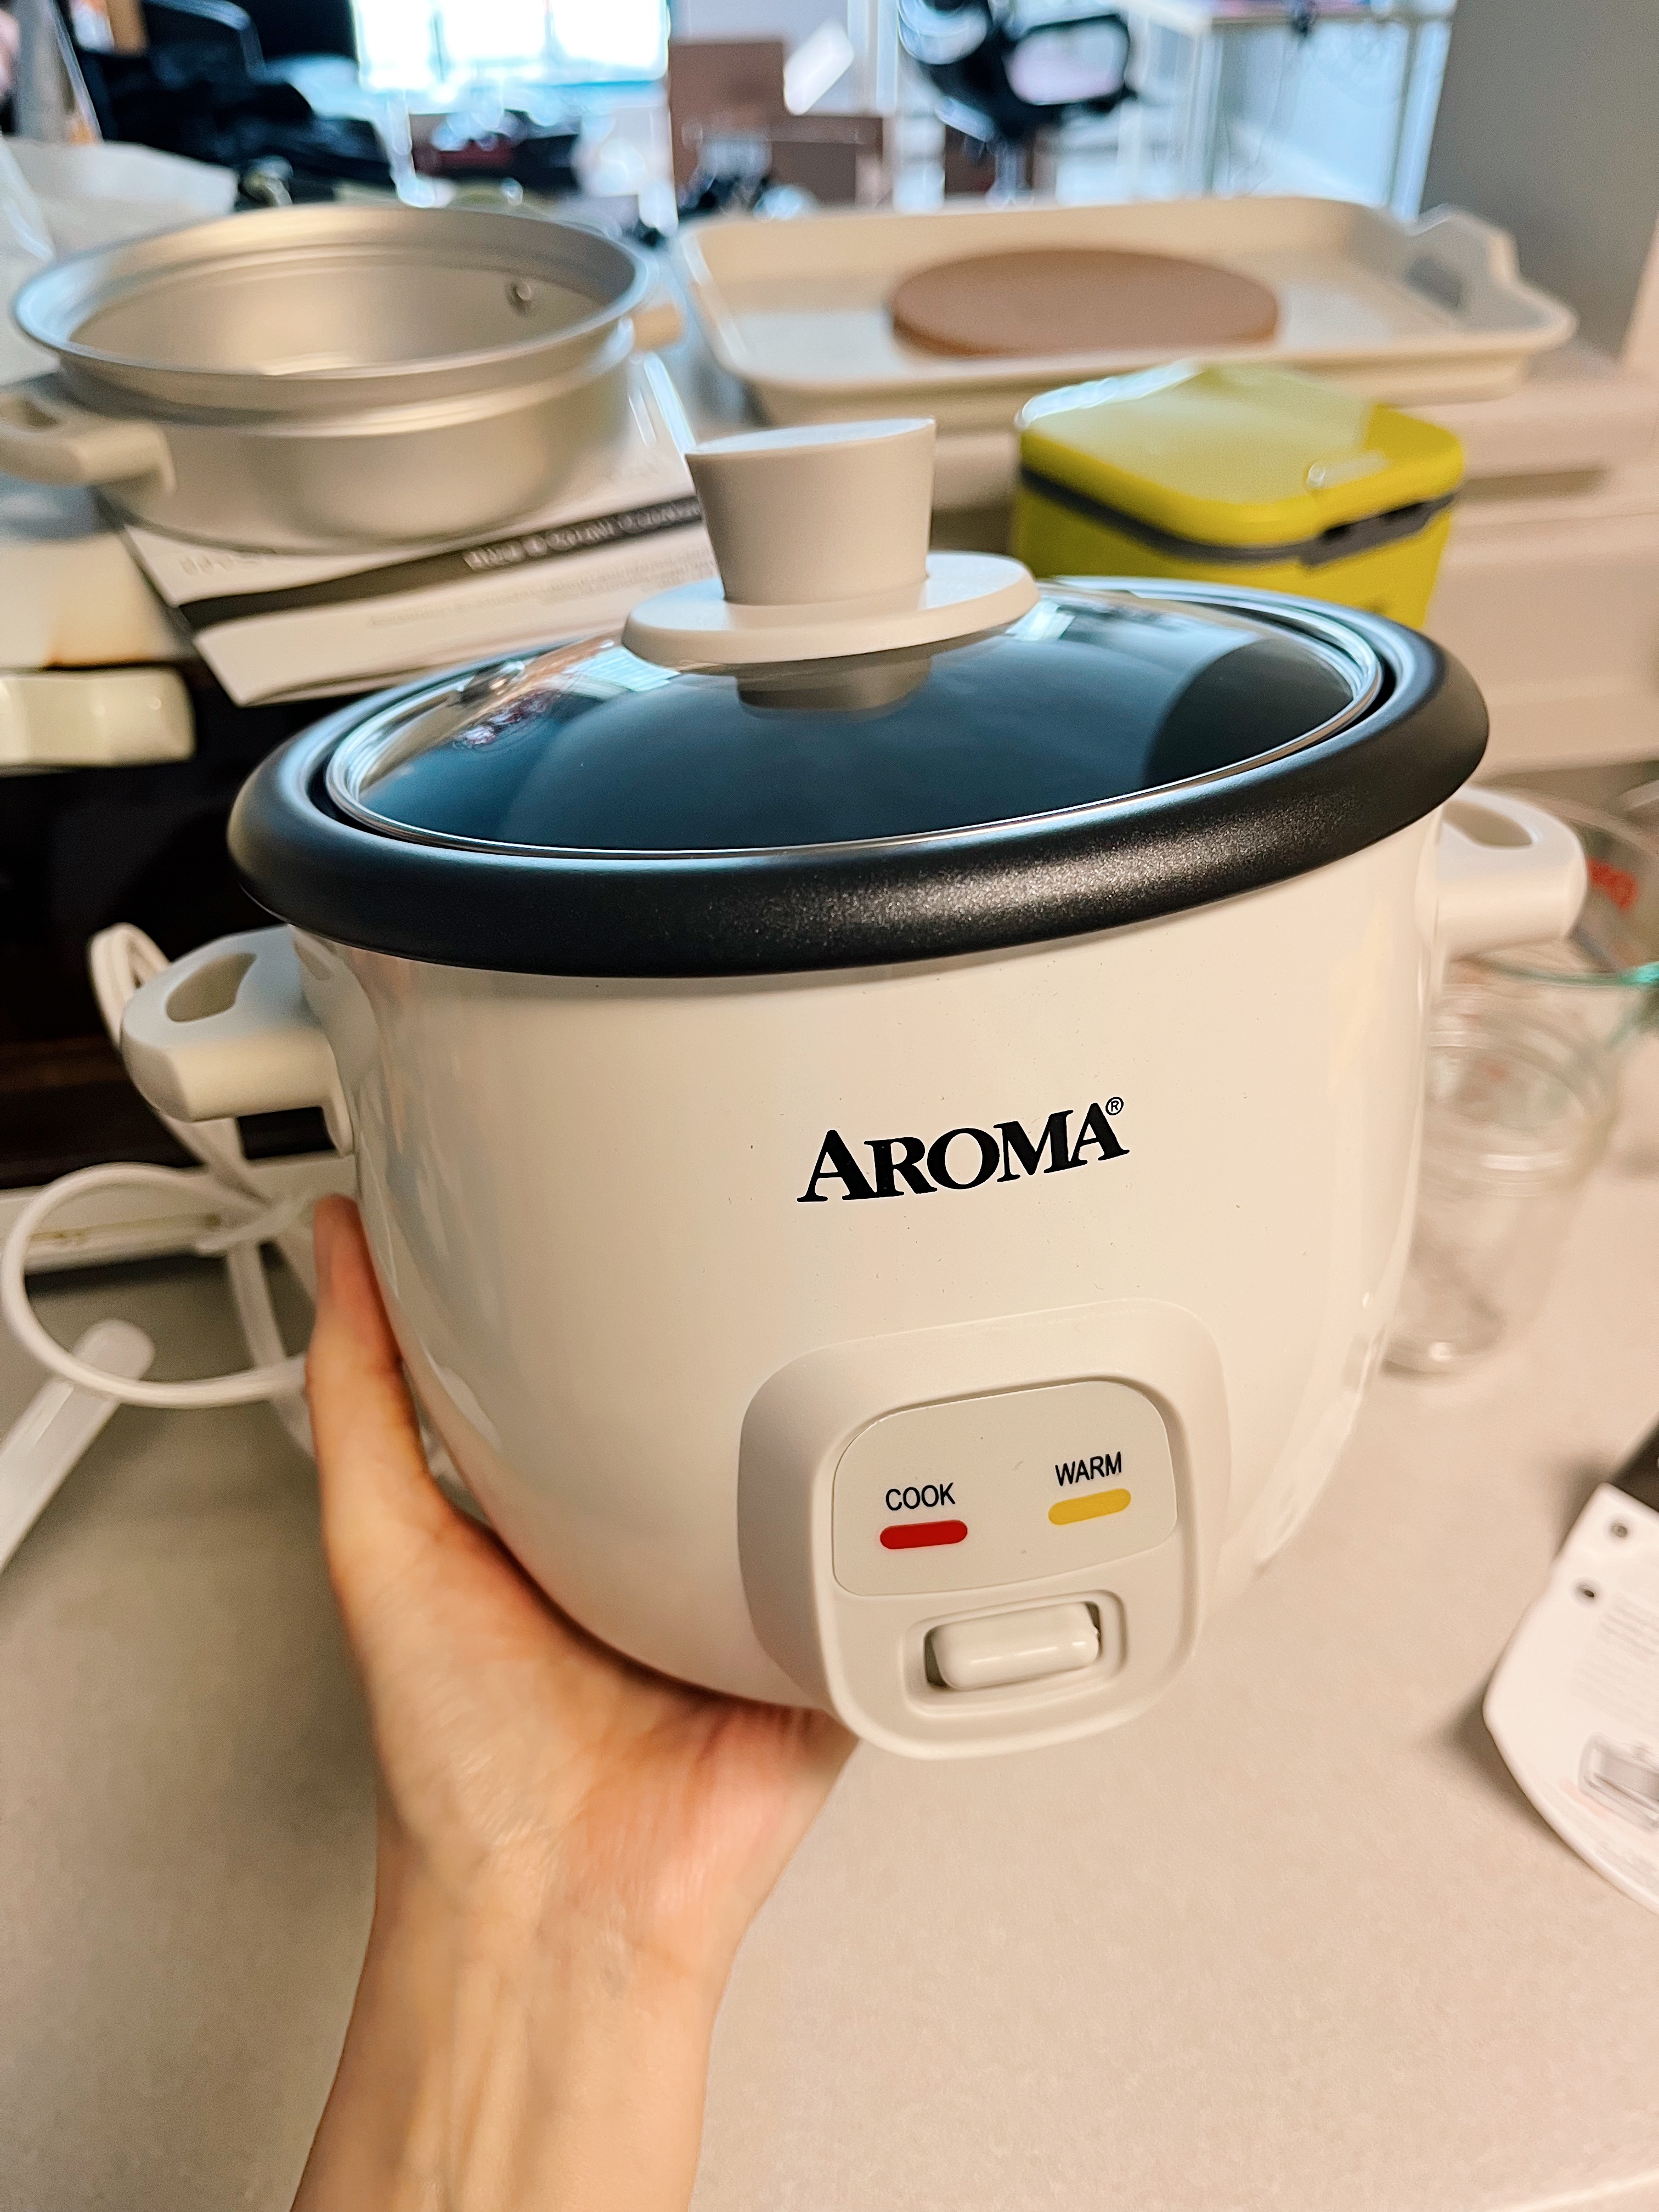 A rice cooker small enough that I'm holding it in my hand.